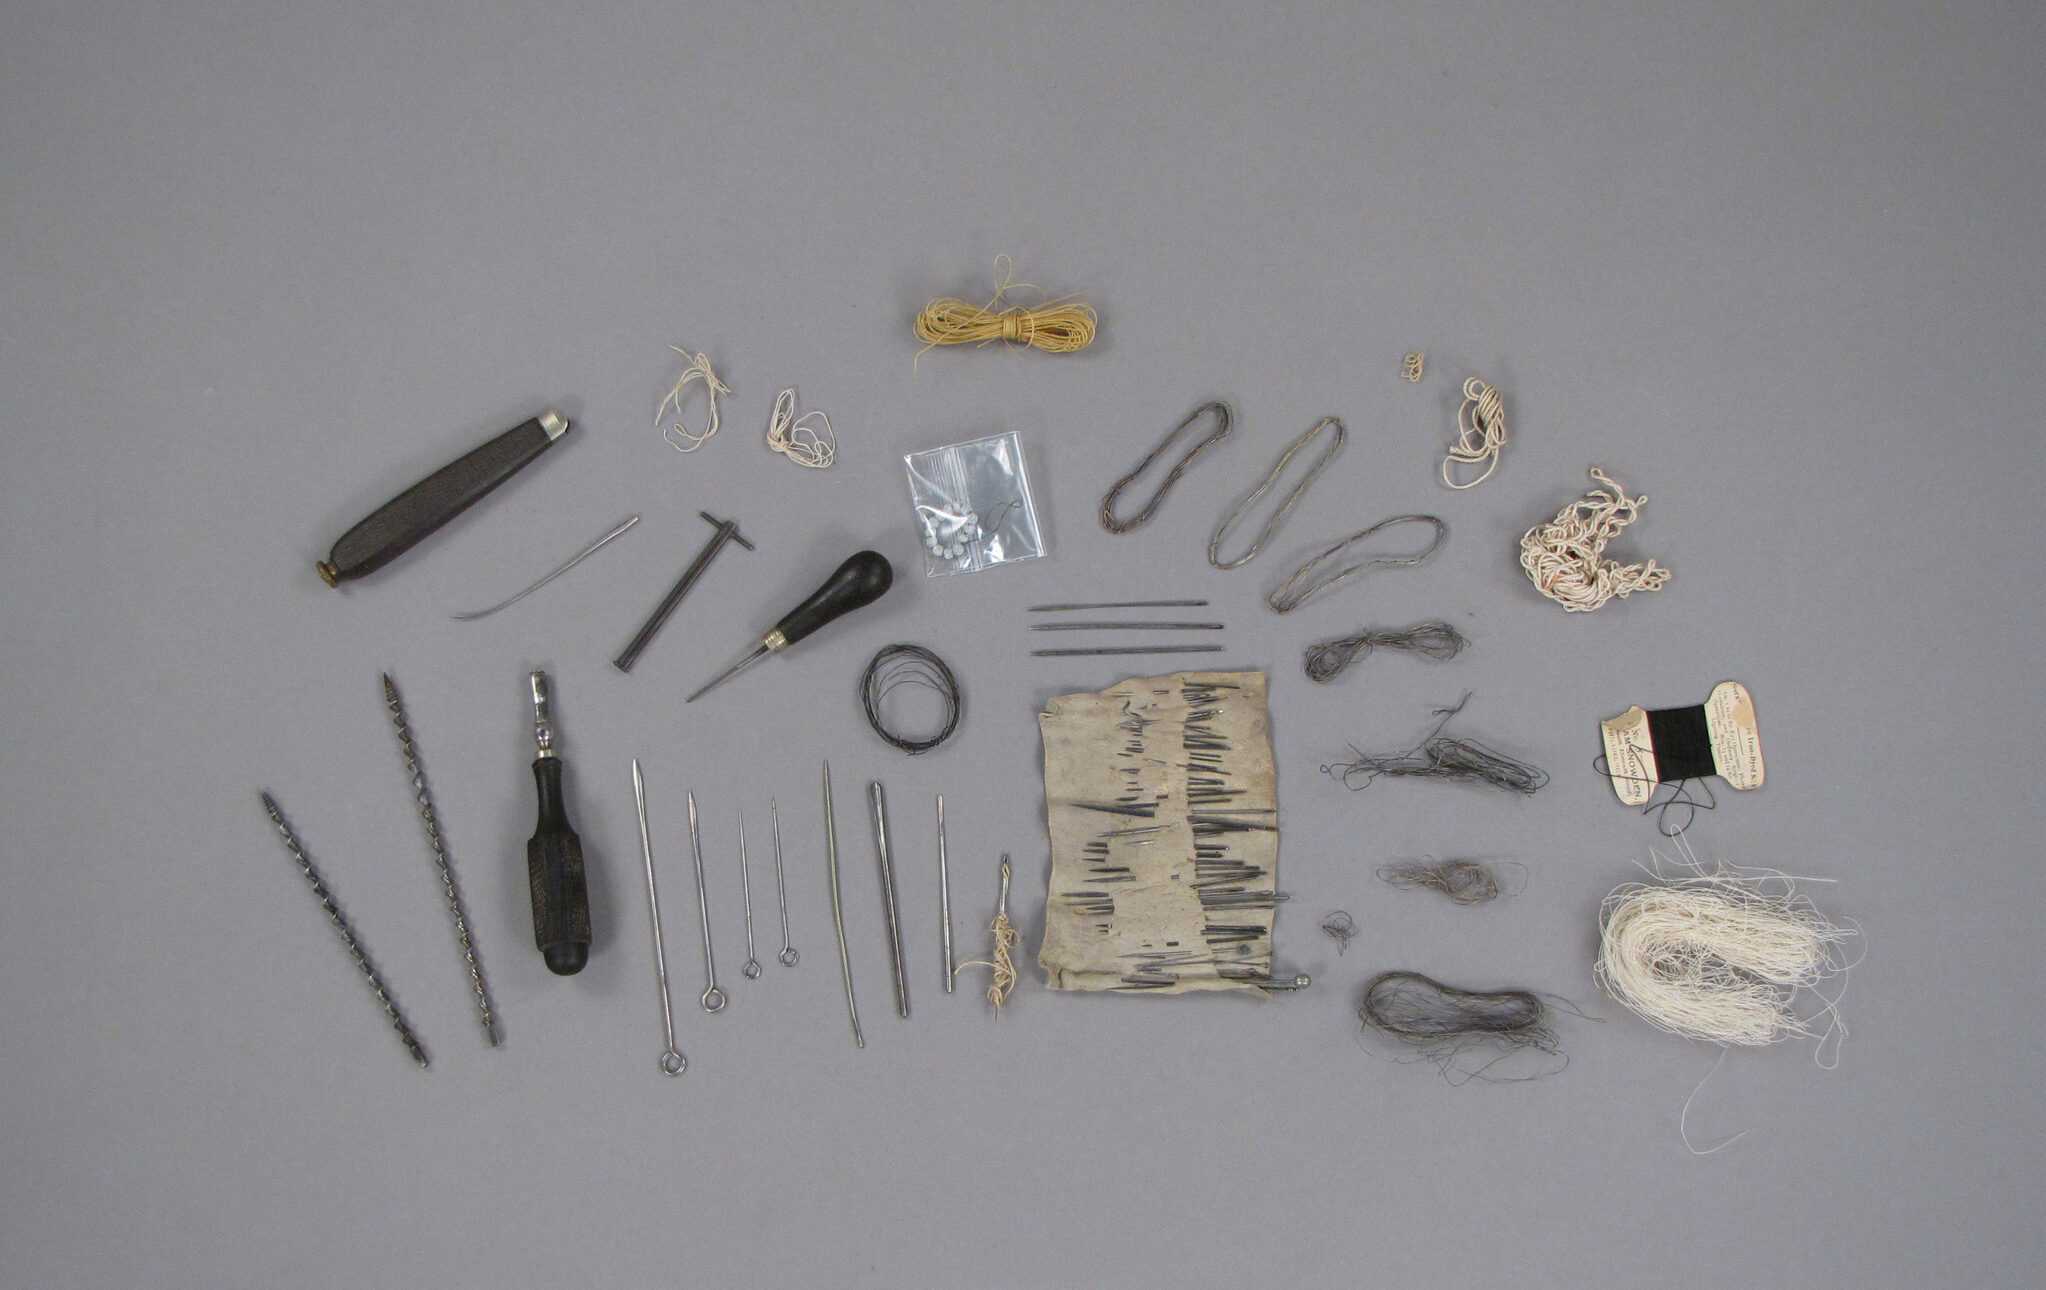 Photograph of J. Marion Sim's tools